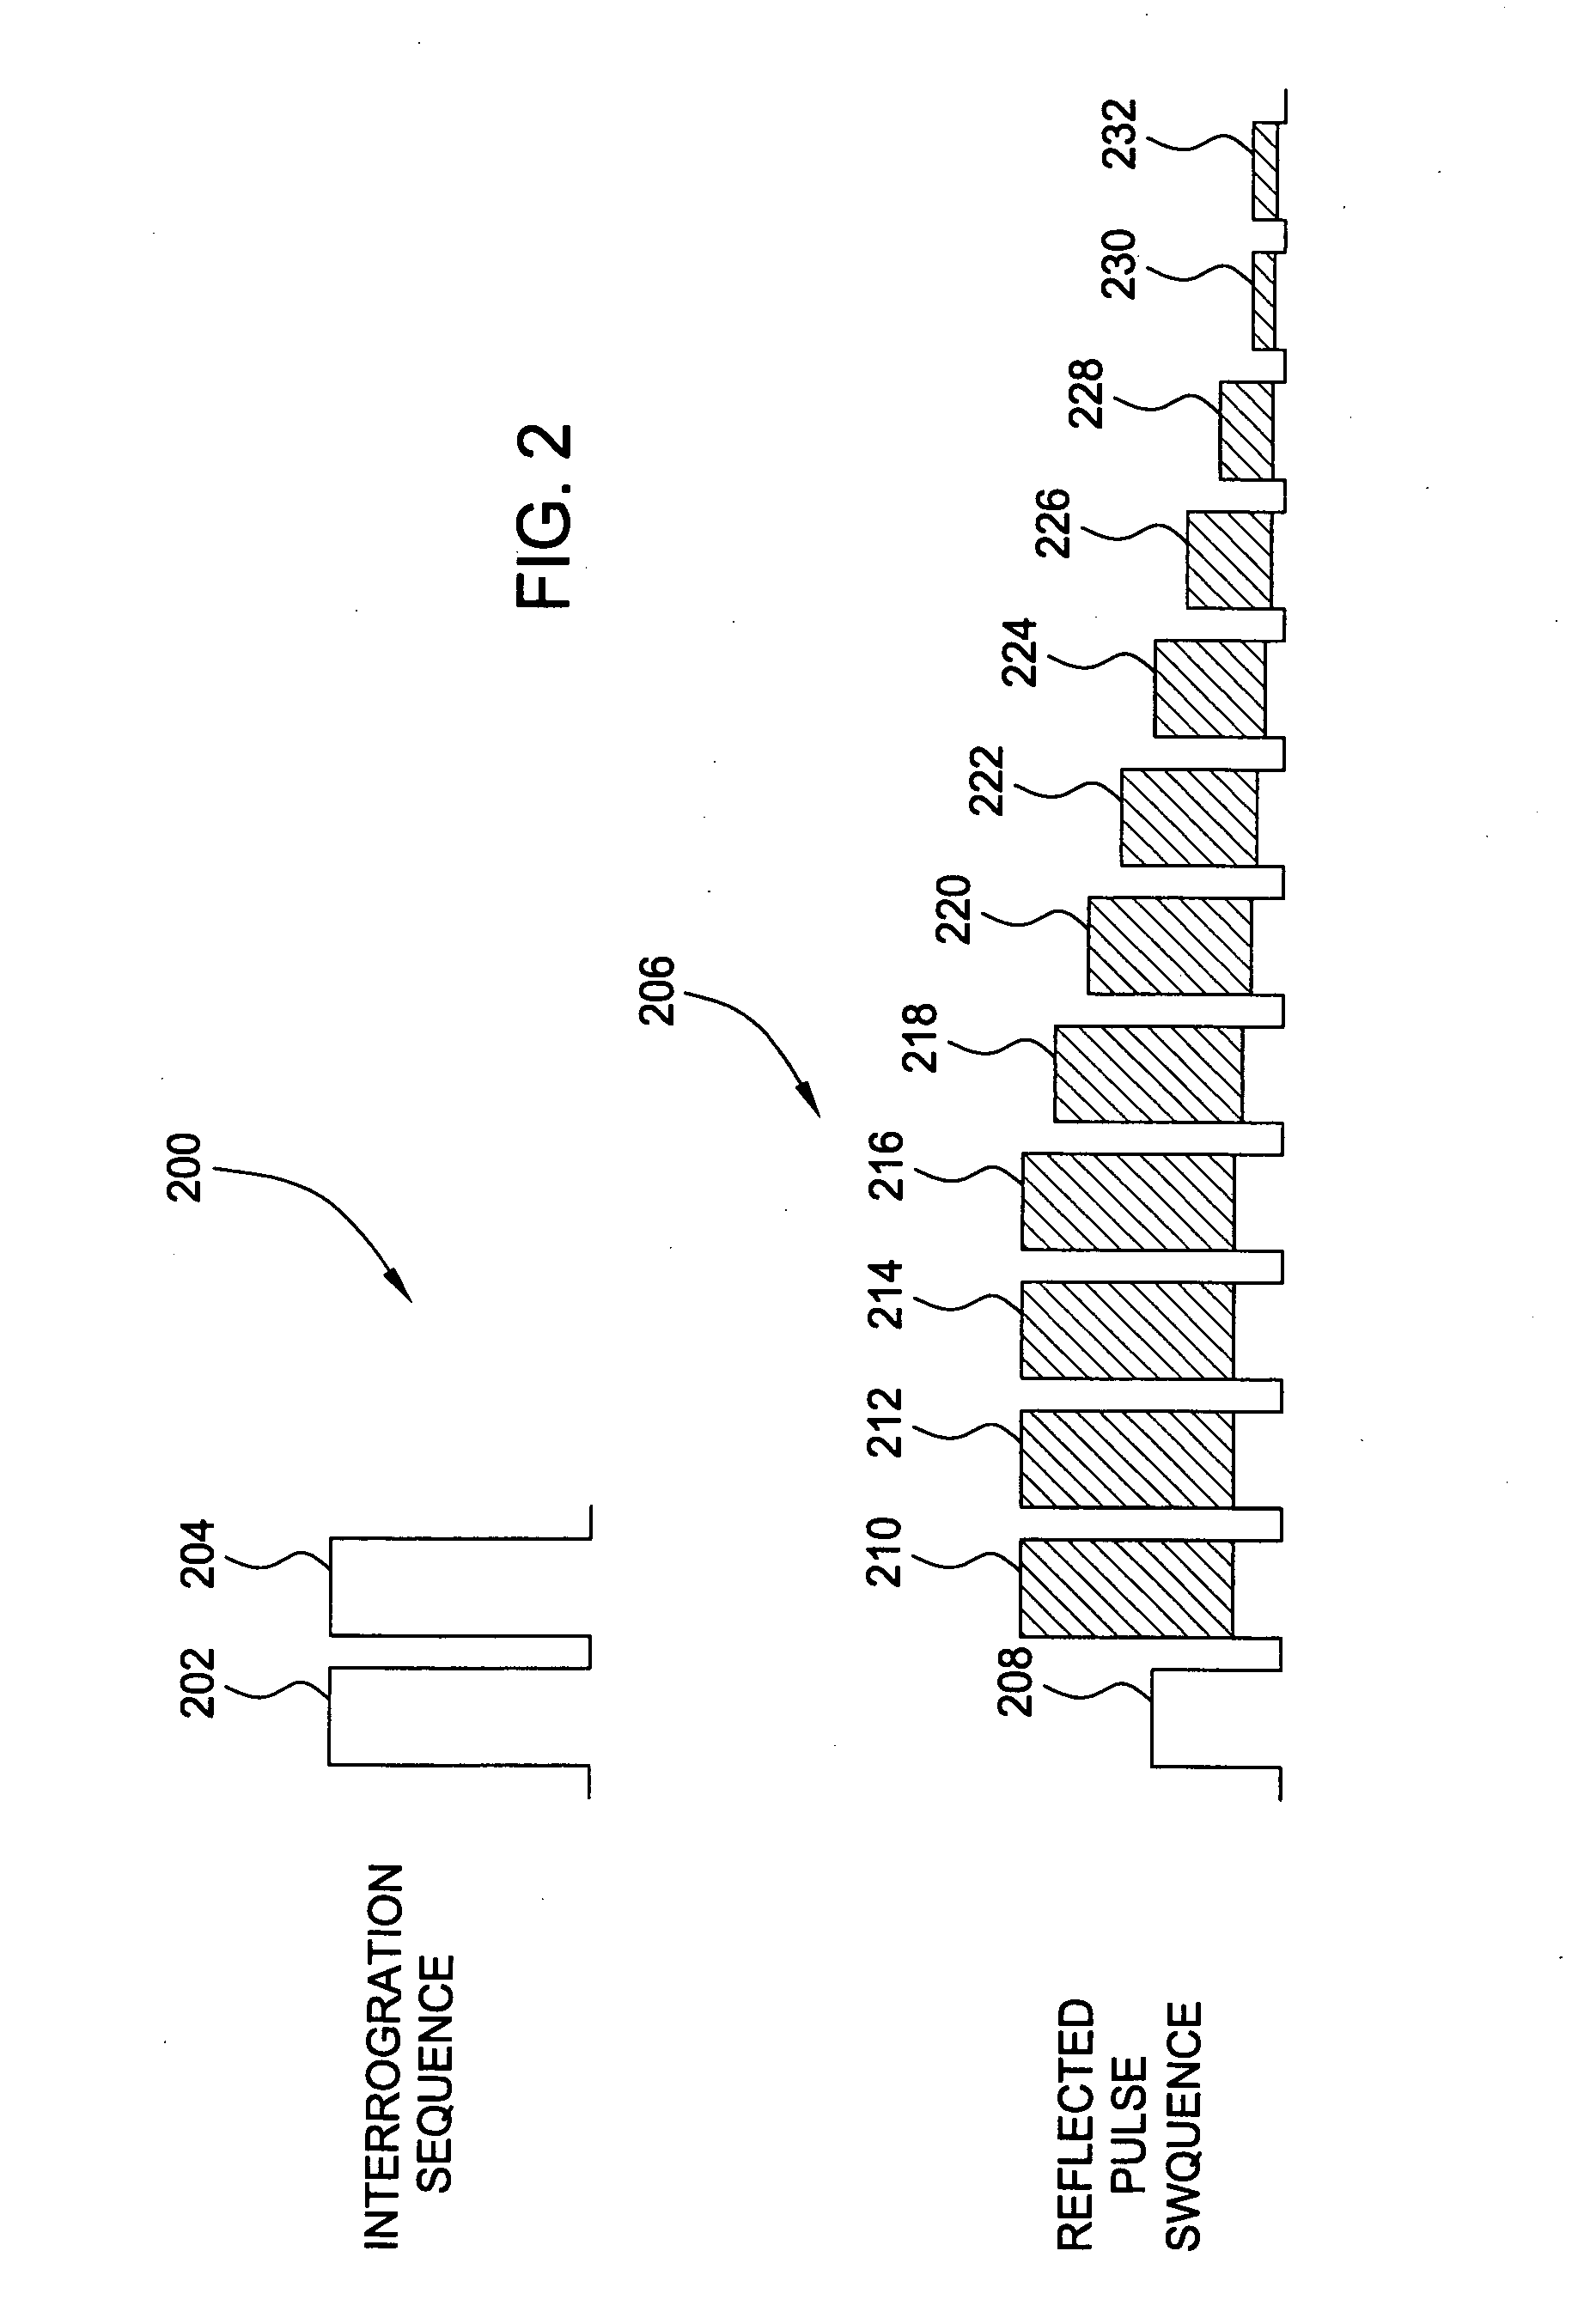 Method and apparatus for reducing crosstalk interference in an inline Fabry-Perot sensor array